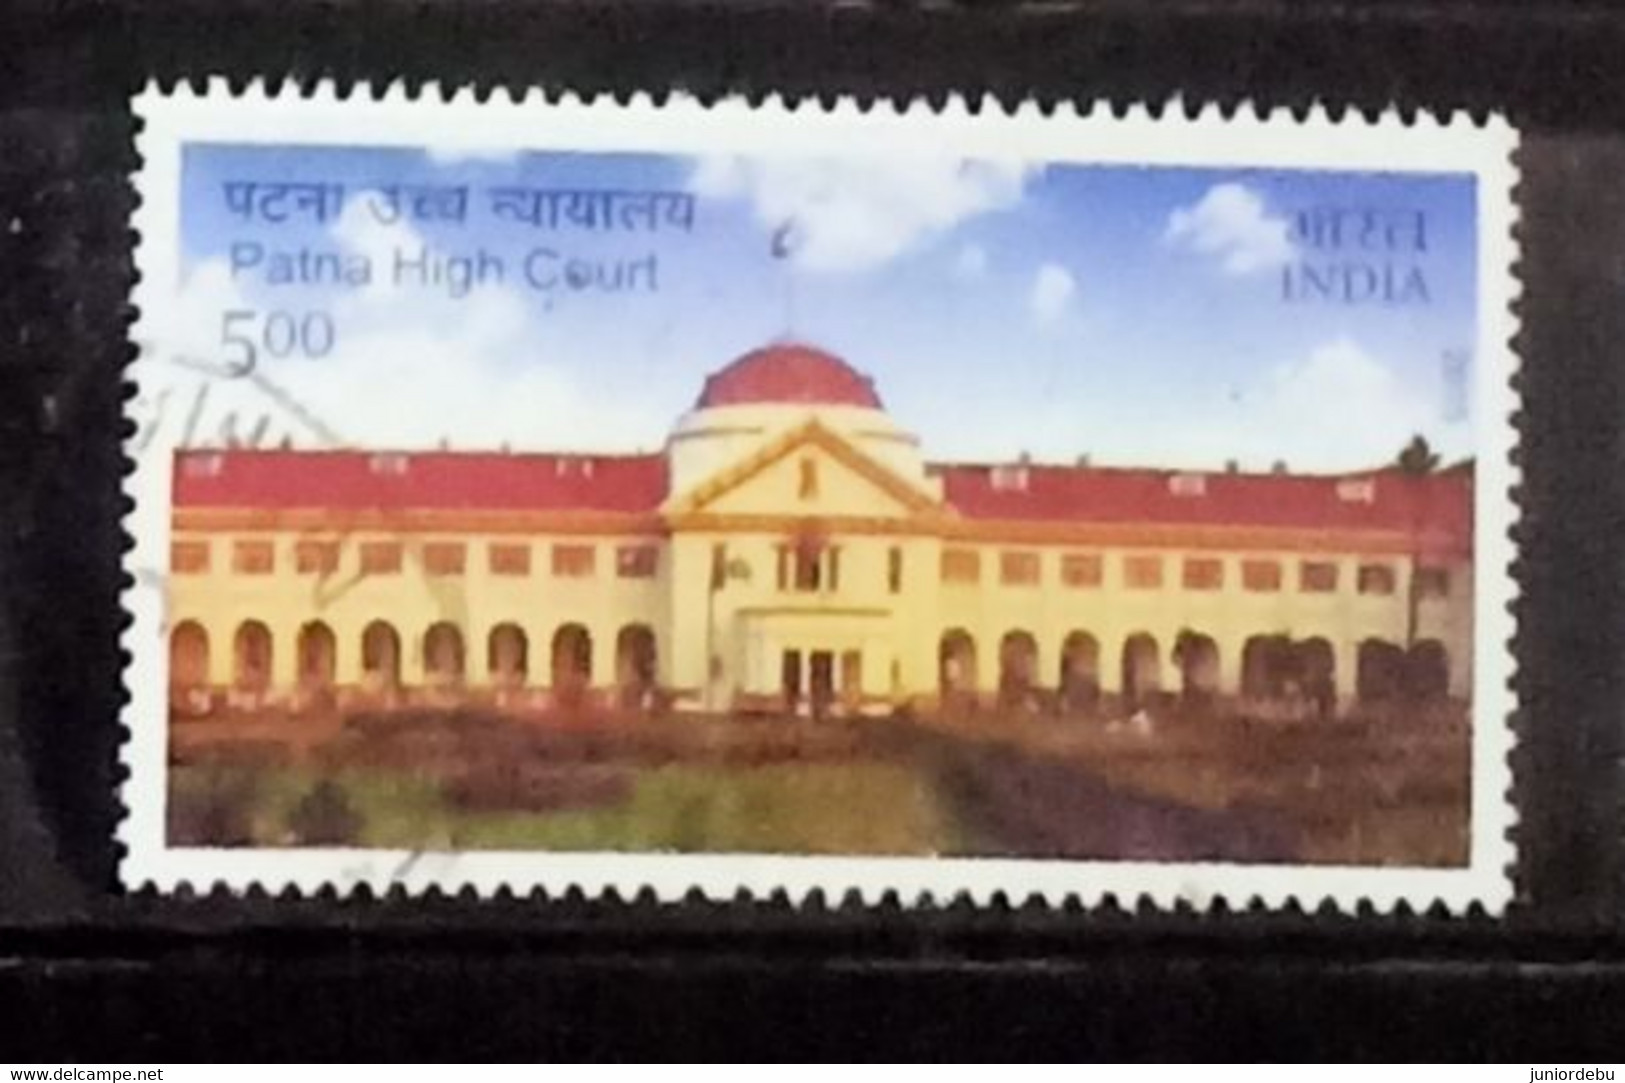 India - 2015 -  Patna High Court   - Used. Condition As Per Scan. - Gebruikt